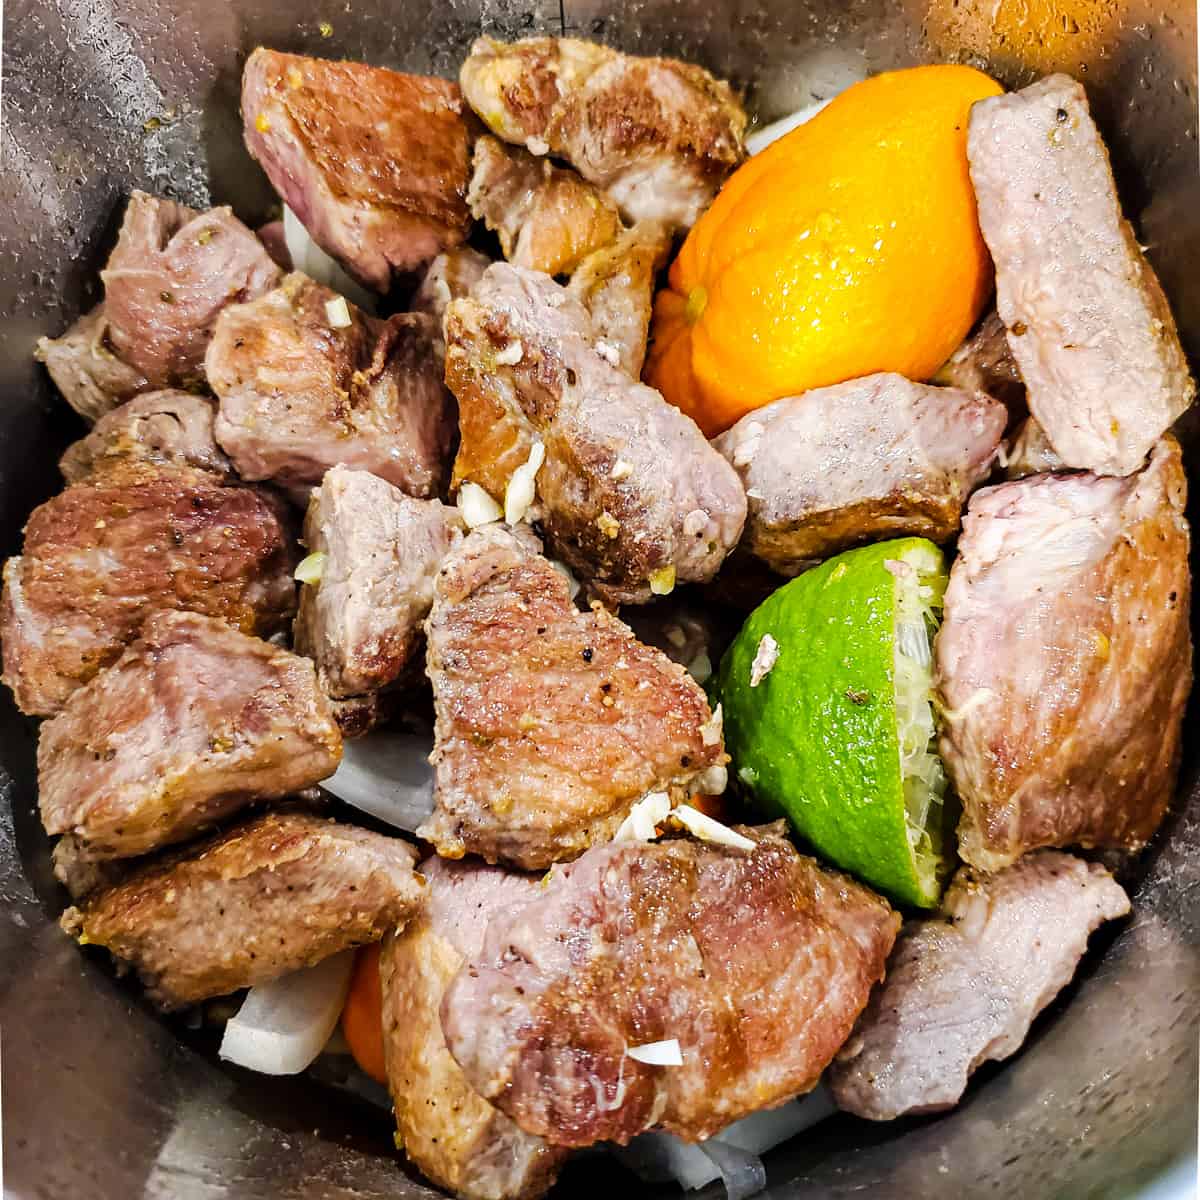 Seared pork chunks with citrus and mojo sauce in an Instant Pot before pressure cooking.